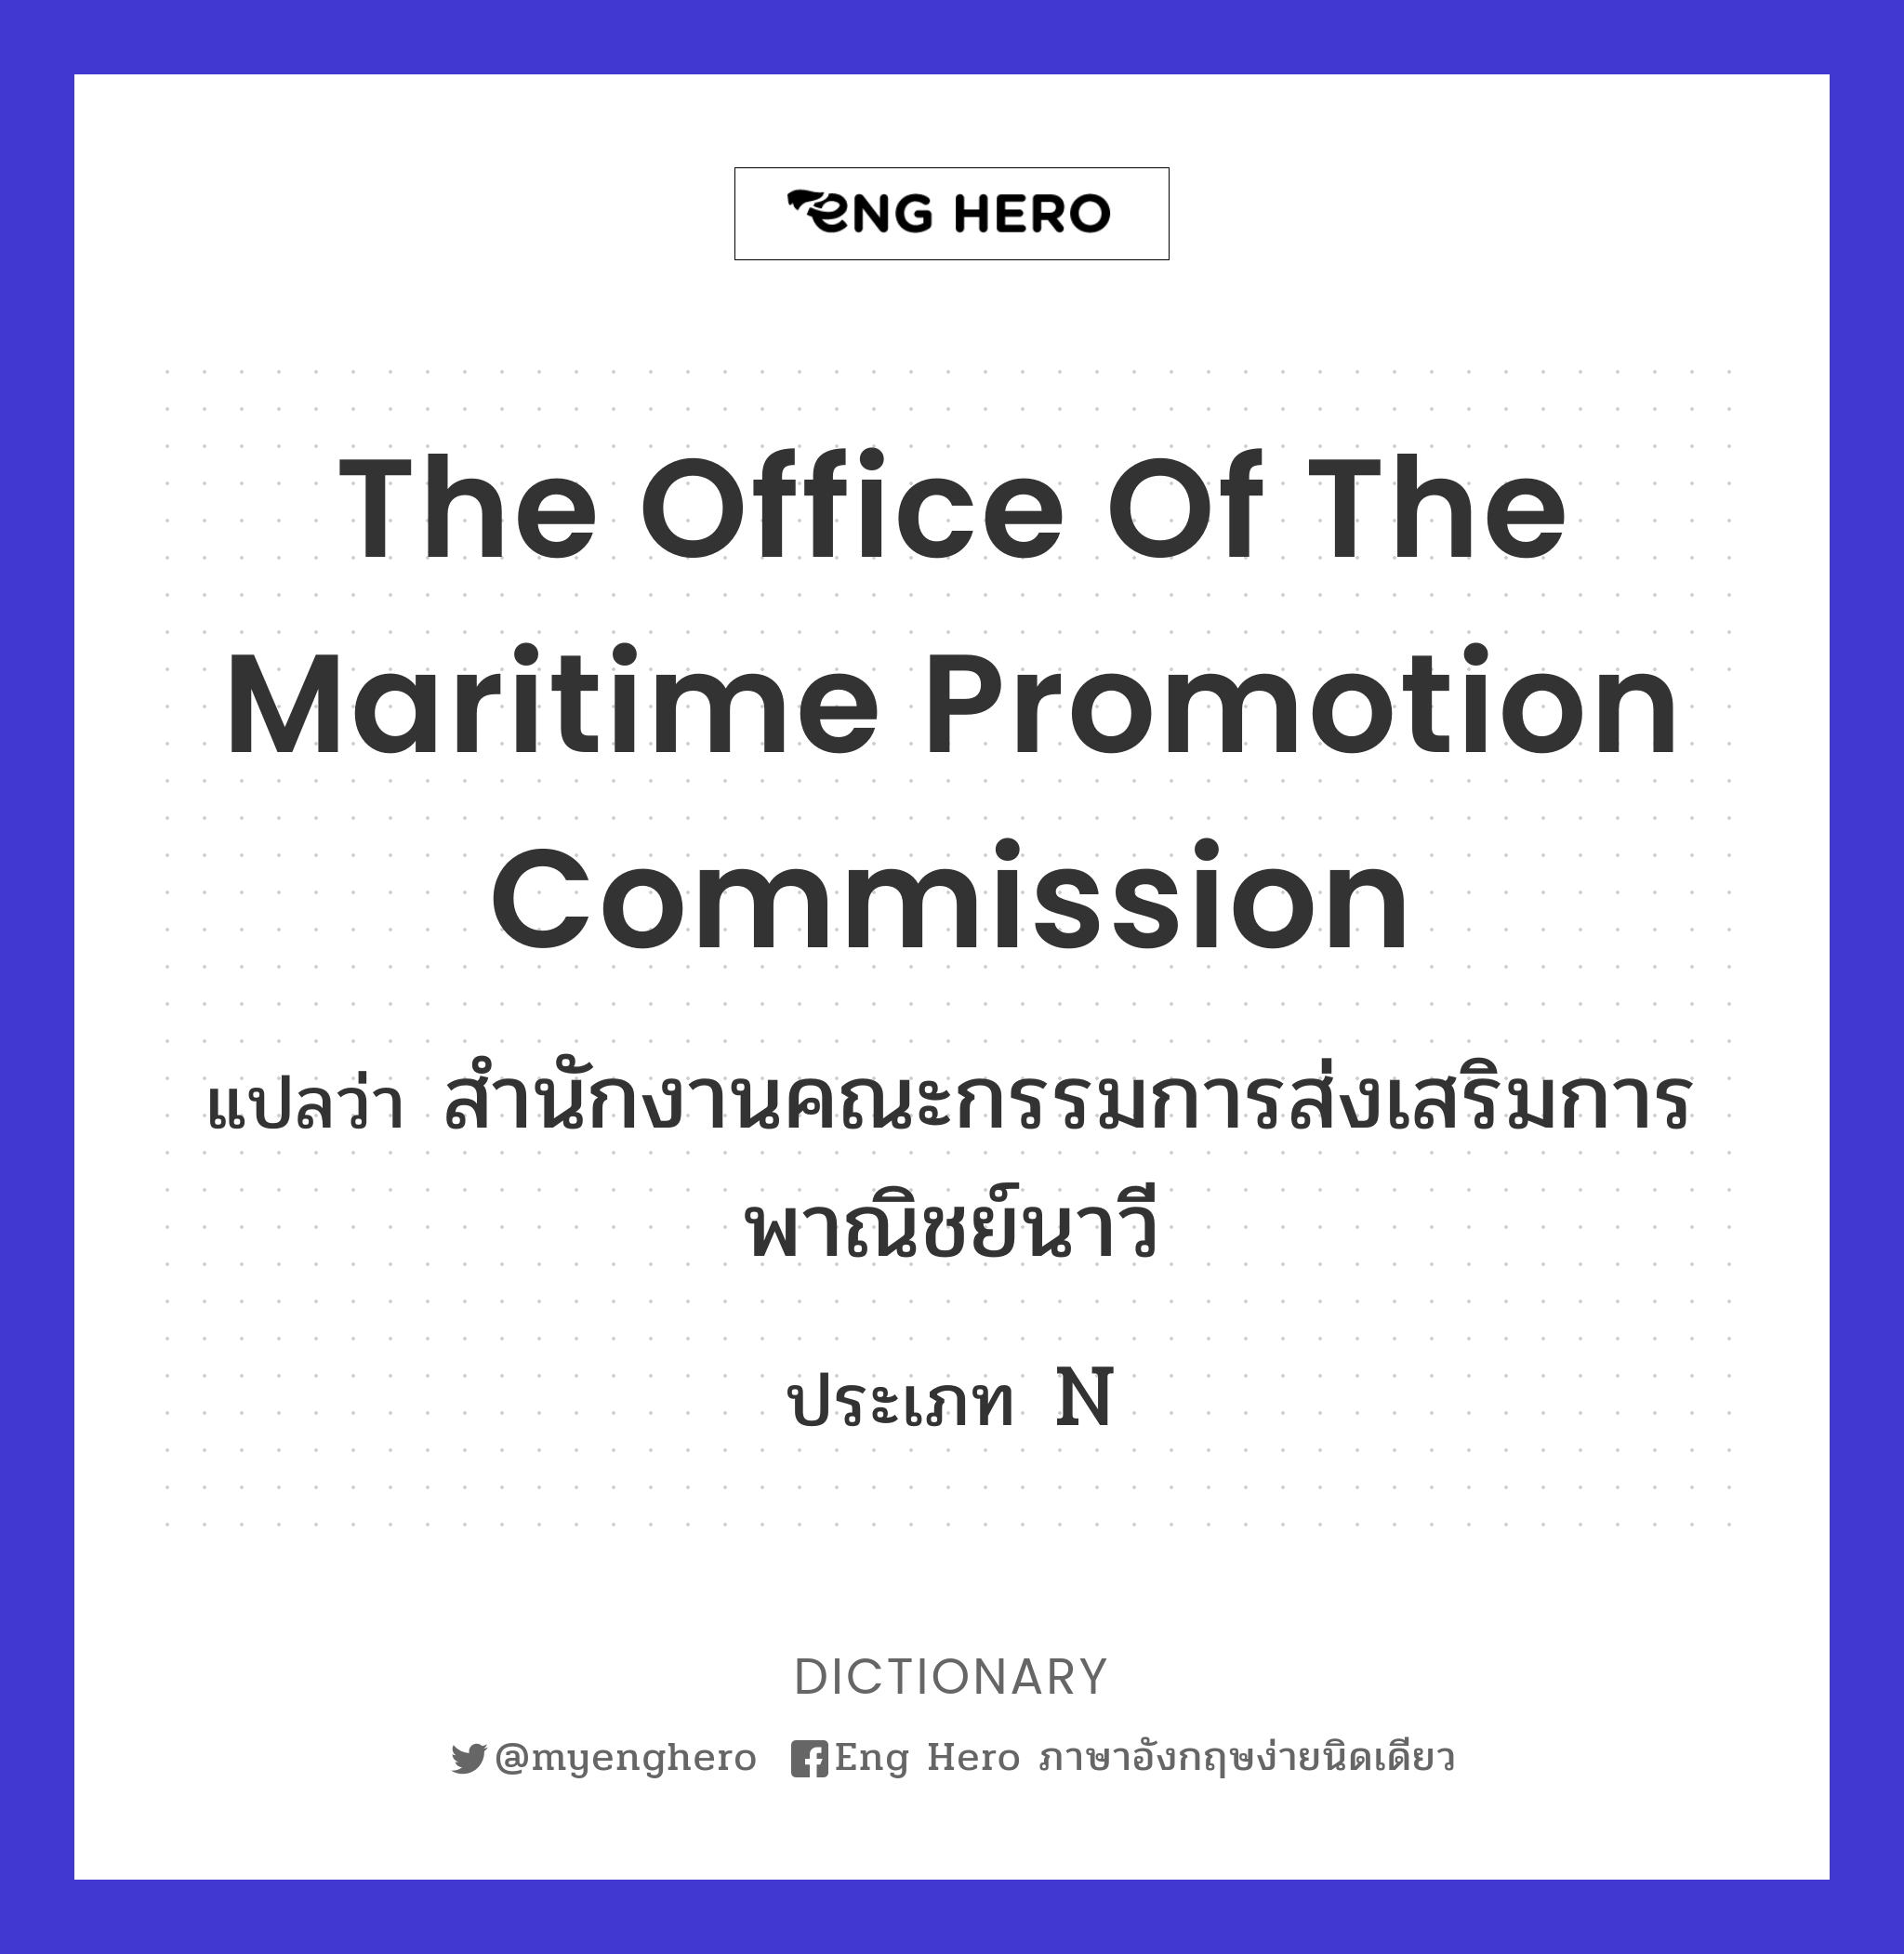 The Office of the Maritime Promotion Commission